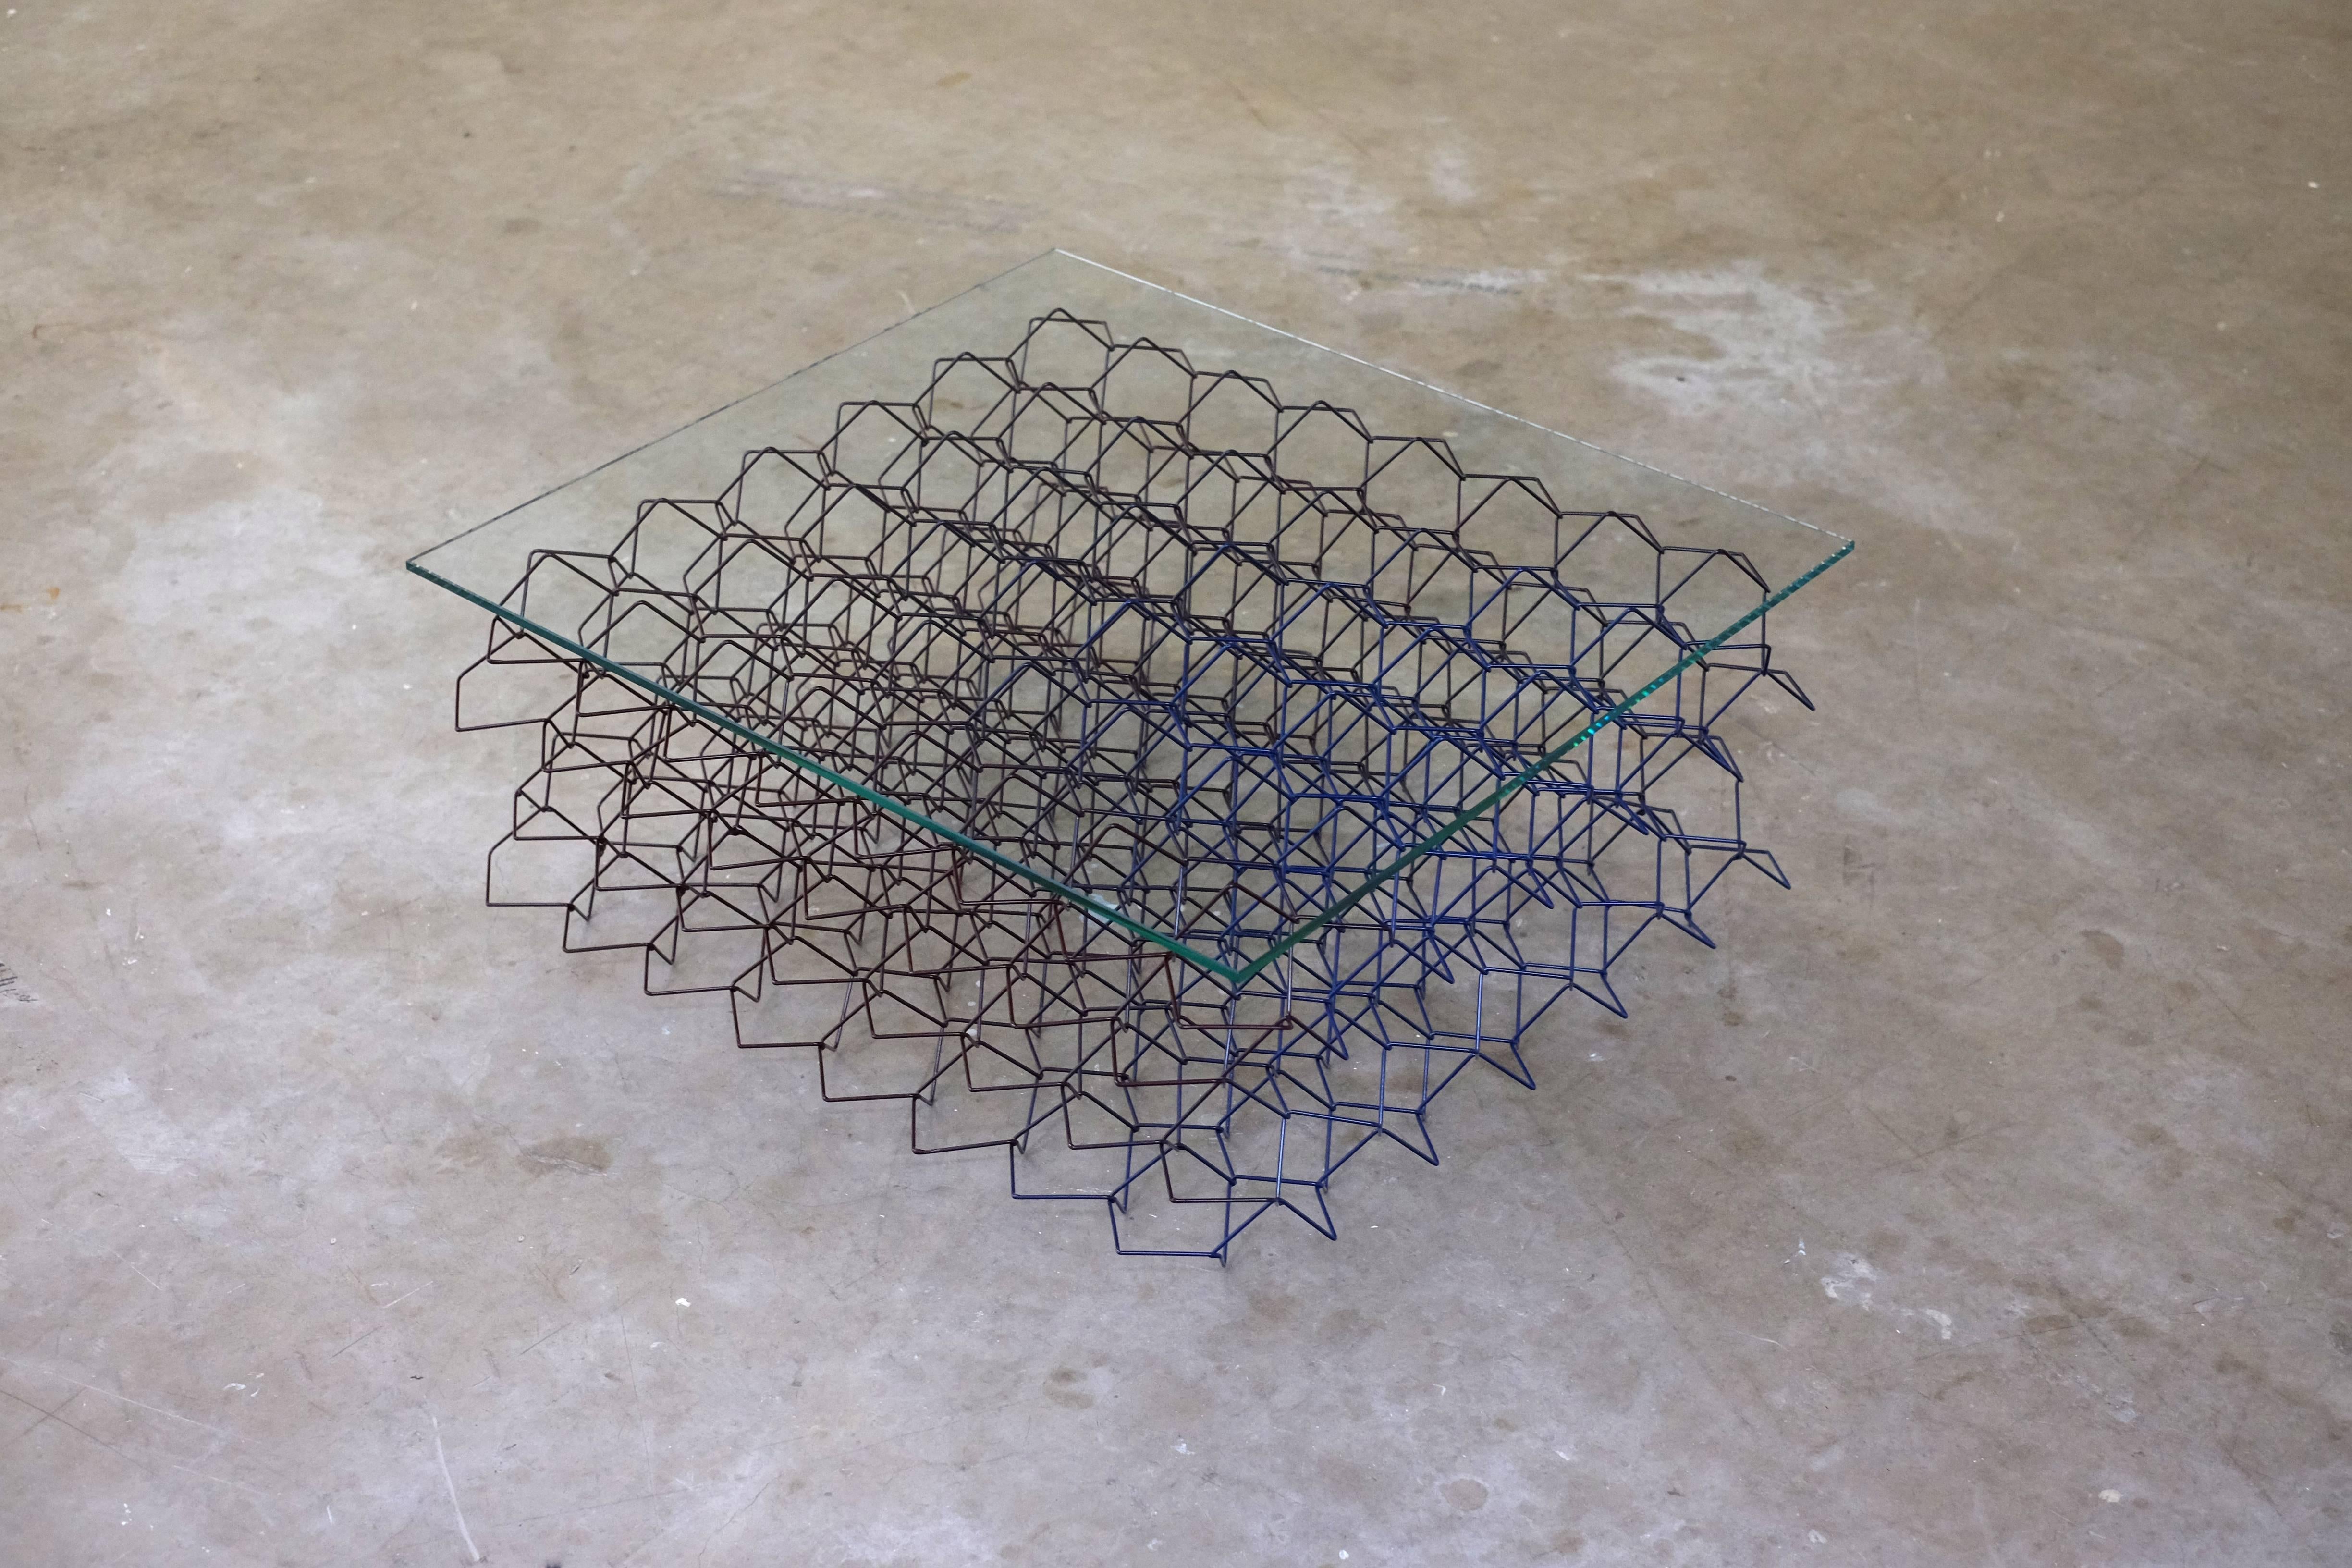 The seismic coffee table was inspired by the movement and vibrations that occur in an earthquake. Three-dimensional bent and woven metal wires create a strong and dynamic structure. A range of rhythmic and geometric patterns can be discovered, when